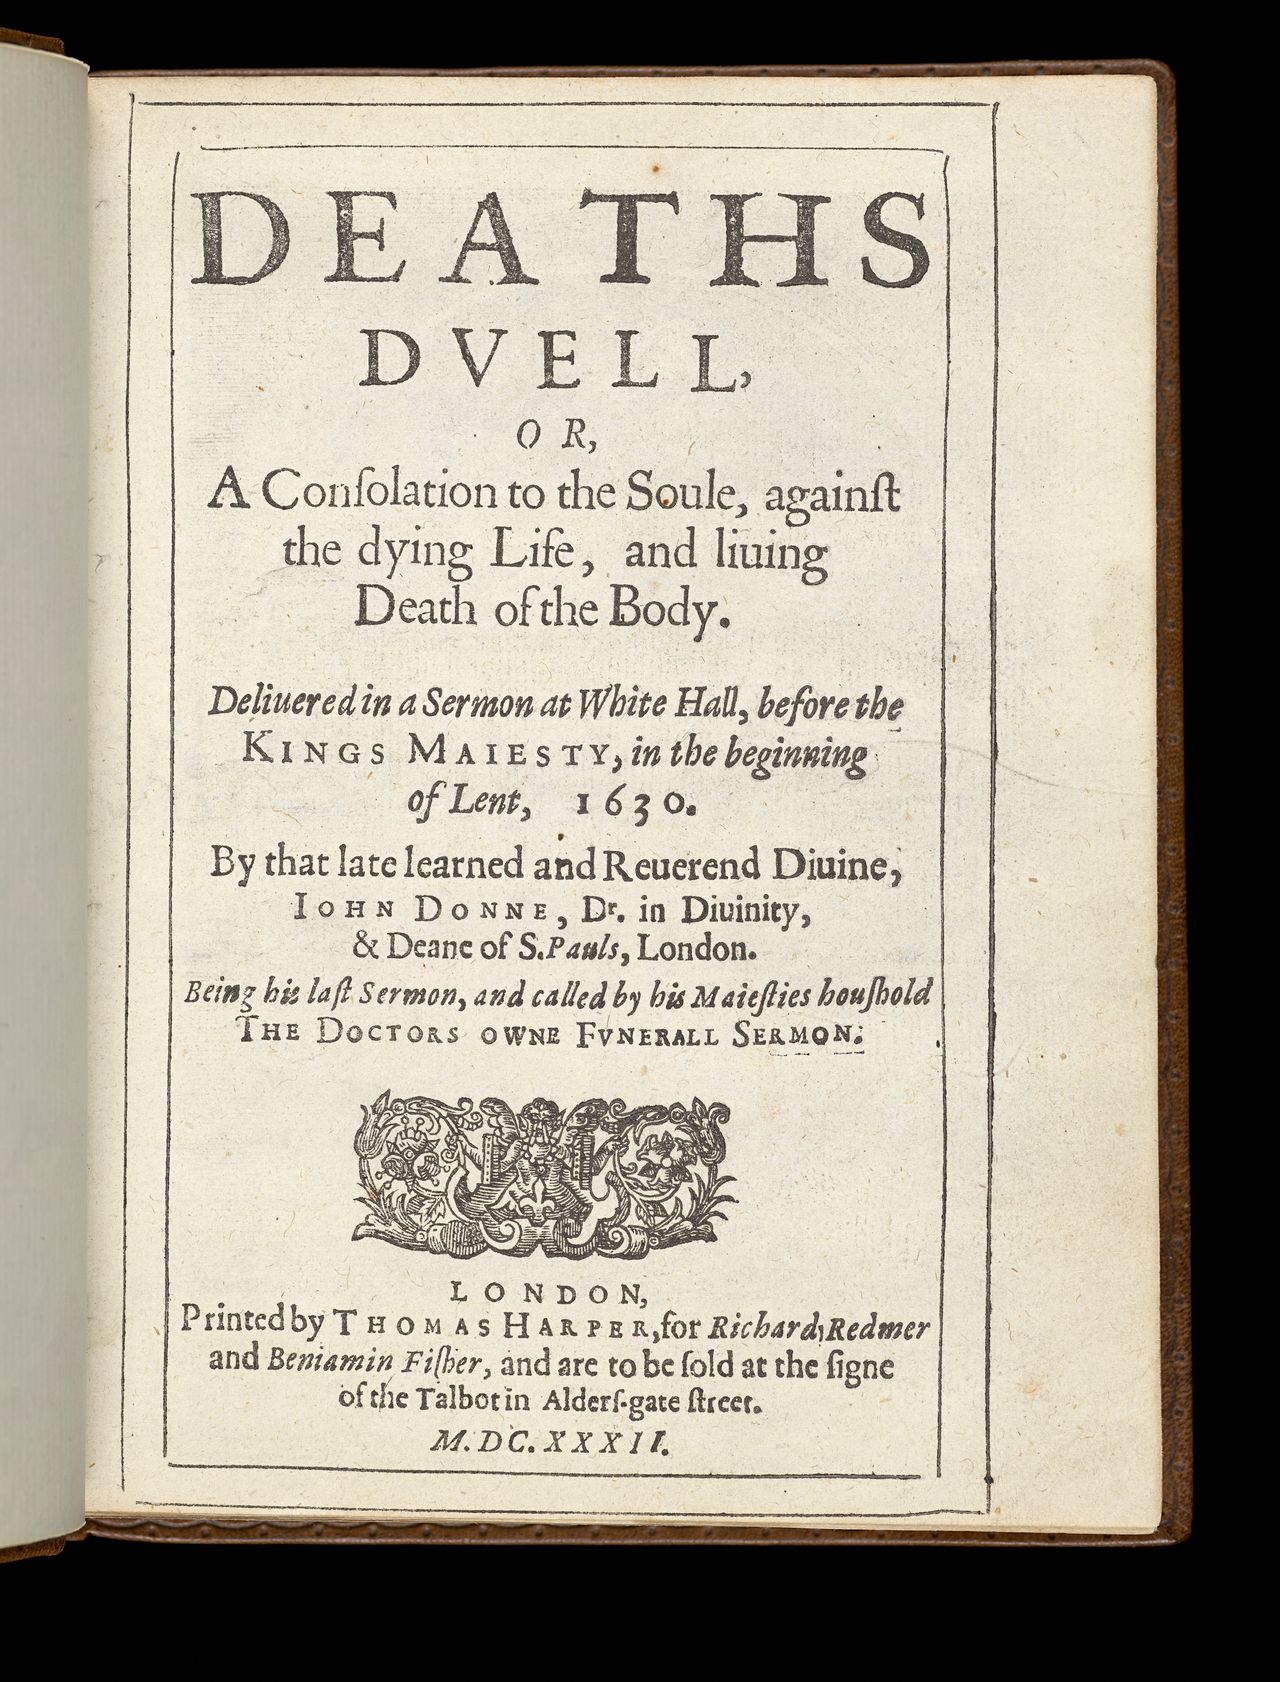 John Donne, <em>Deaths duell, or, A consolation to the soule against the dying life and liuing death of the body: deliuered in a sermon at White Hall before the Kings Maiesty in the beginning of Lent 1630...</em>, London, printed by Thomas Harper for Richard Redmer and Beniamin Fisher, and are to be sold at the signe of the Talbot in Alders-gate street, 1632, State Library Victoria, Melbourne (RAREEMM 321/21)